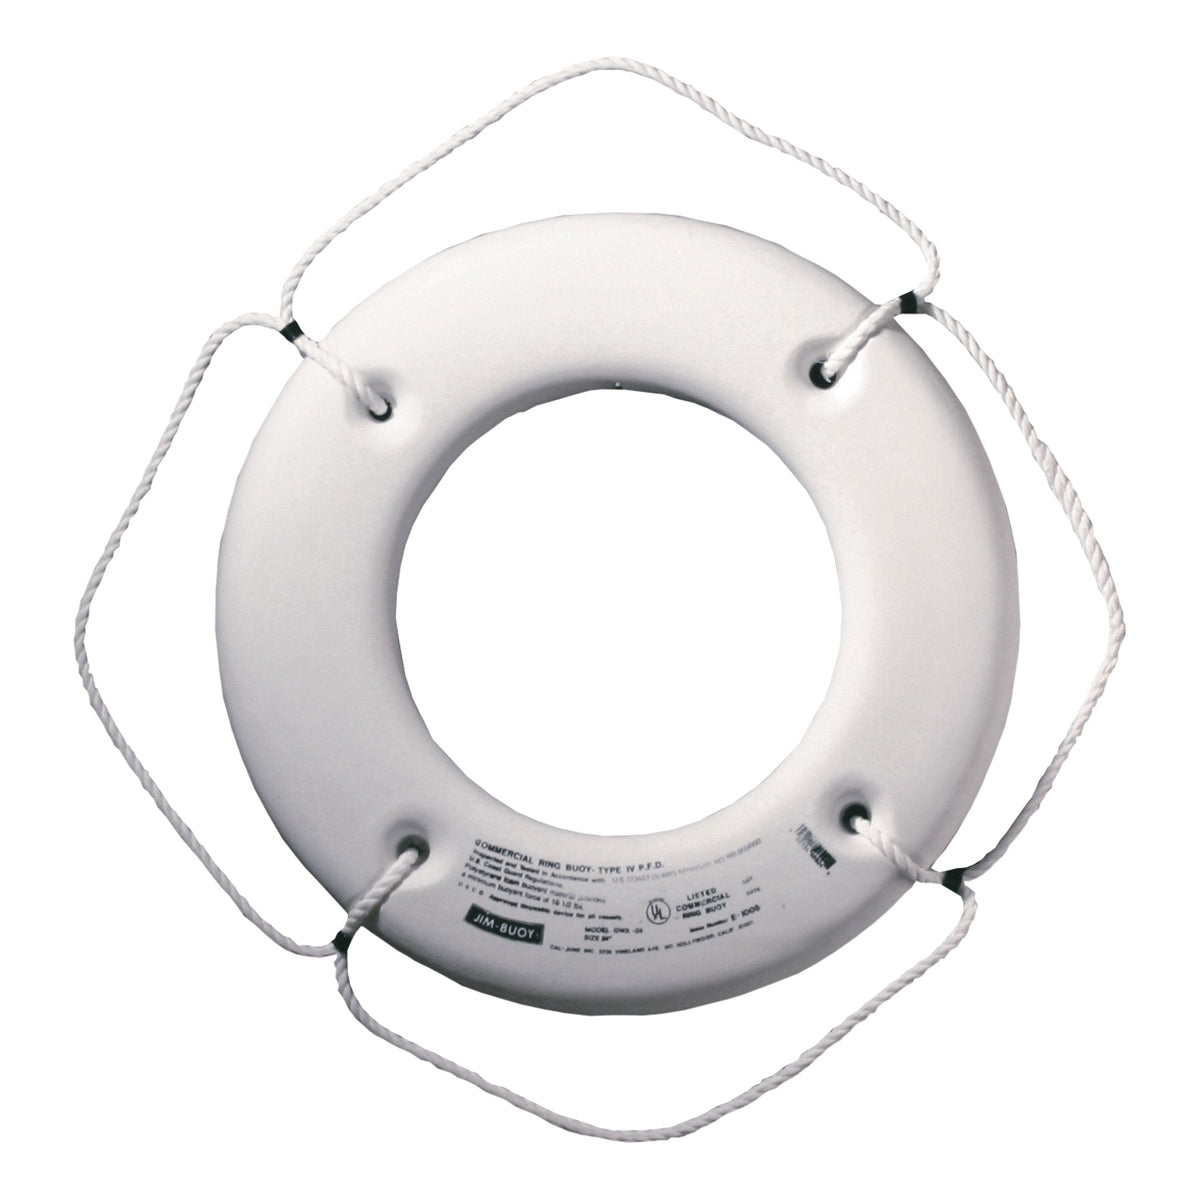 Cal-june Qualifies for Free Shipping Cal-June Canada Hard Shell Lifebuoy Small Vessel 24" White #C HS-24 W